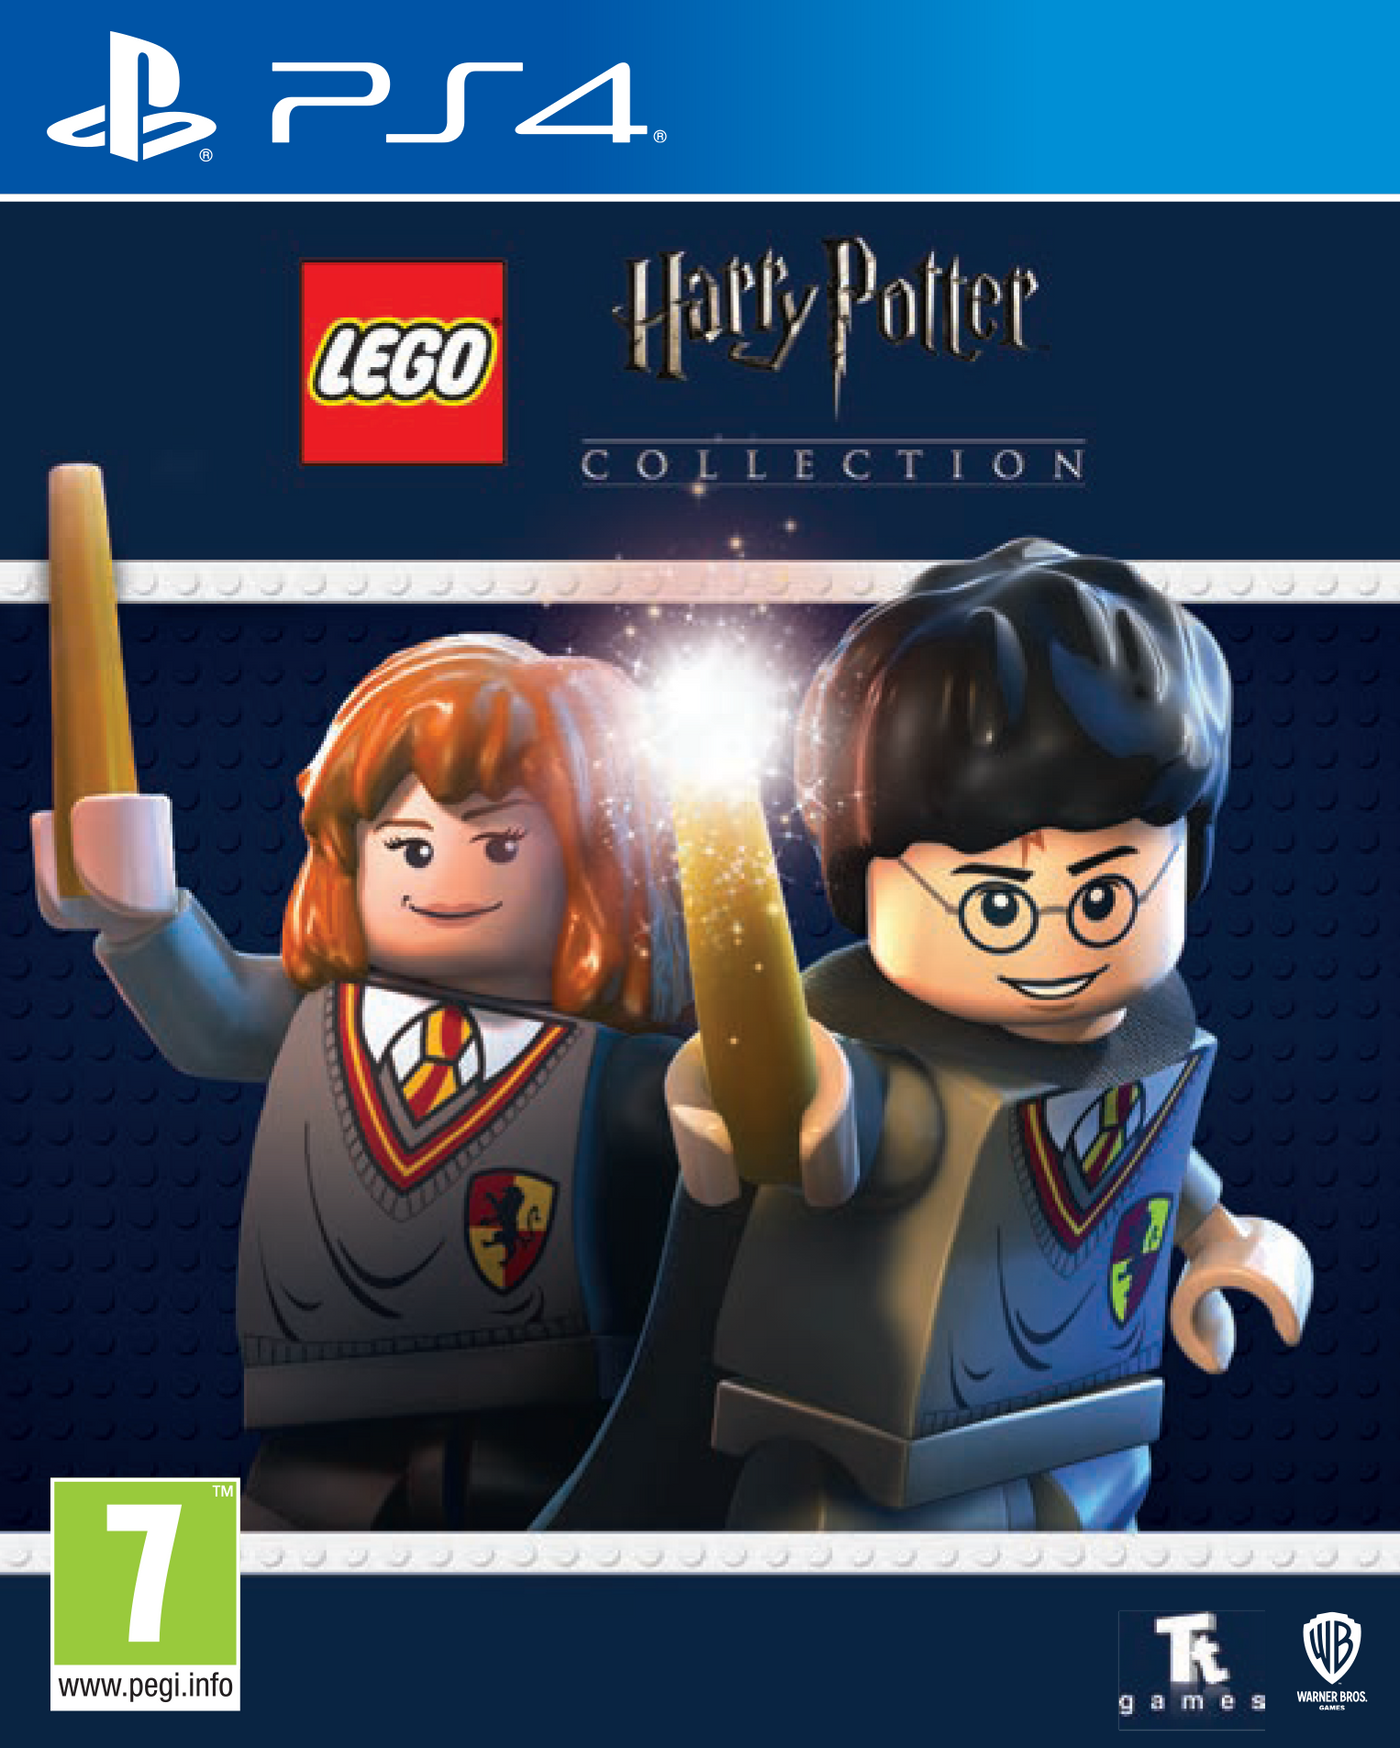 LEGO Harry Potter Video Game Collection: Years 1-7 (PS4)